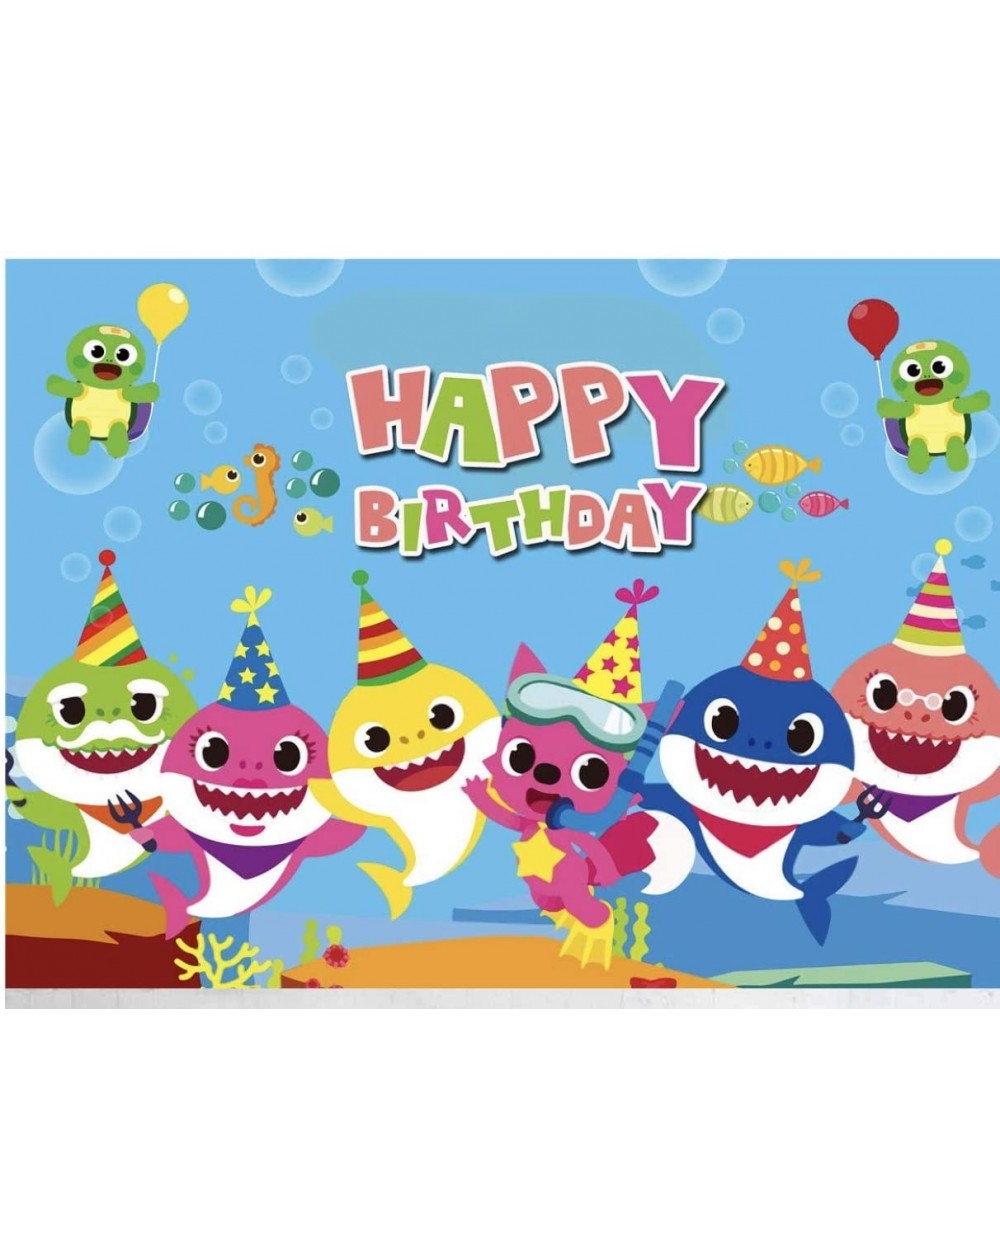 Banners Baby Shark Birthday Banner/Photo Backdrop 4x2.5 ft - C618ZYDT7WQ $20.00